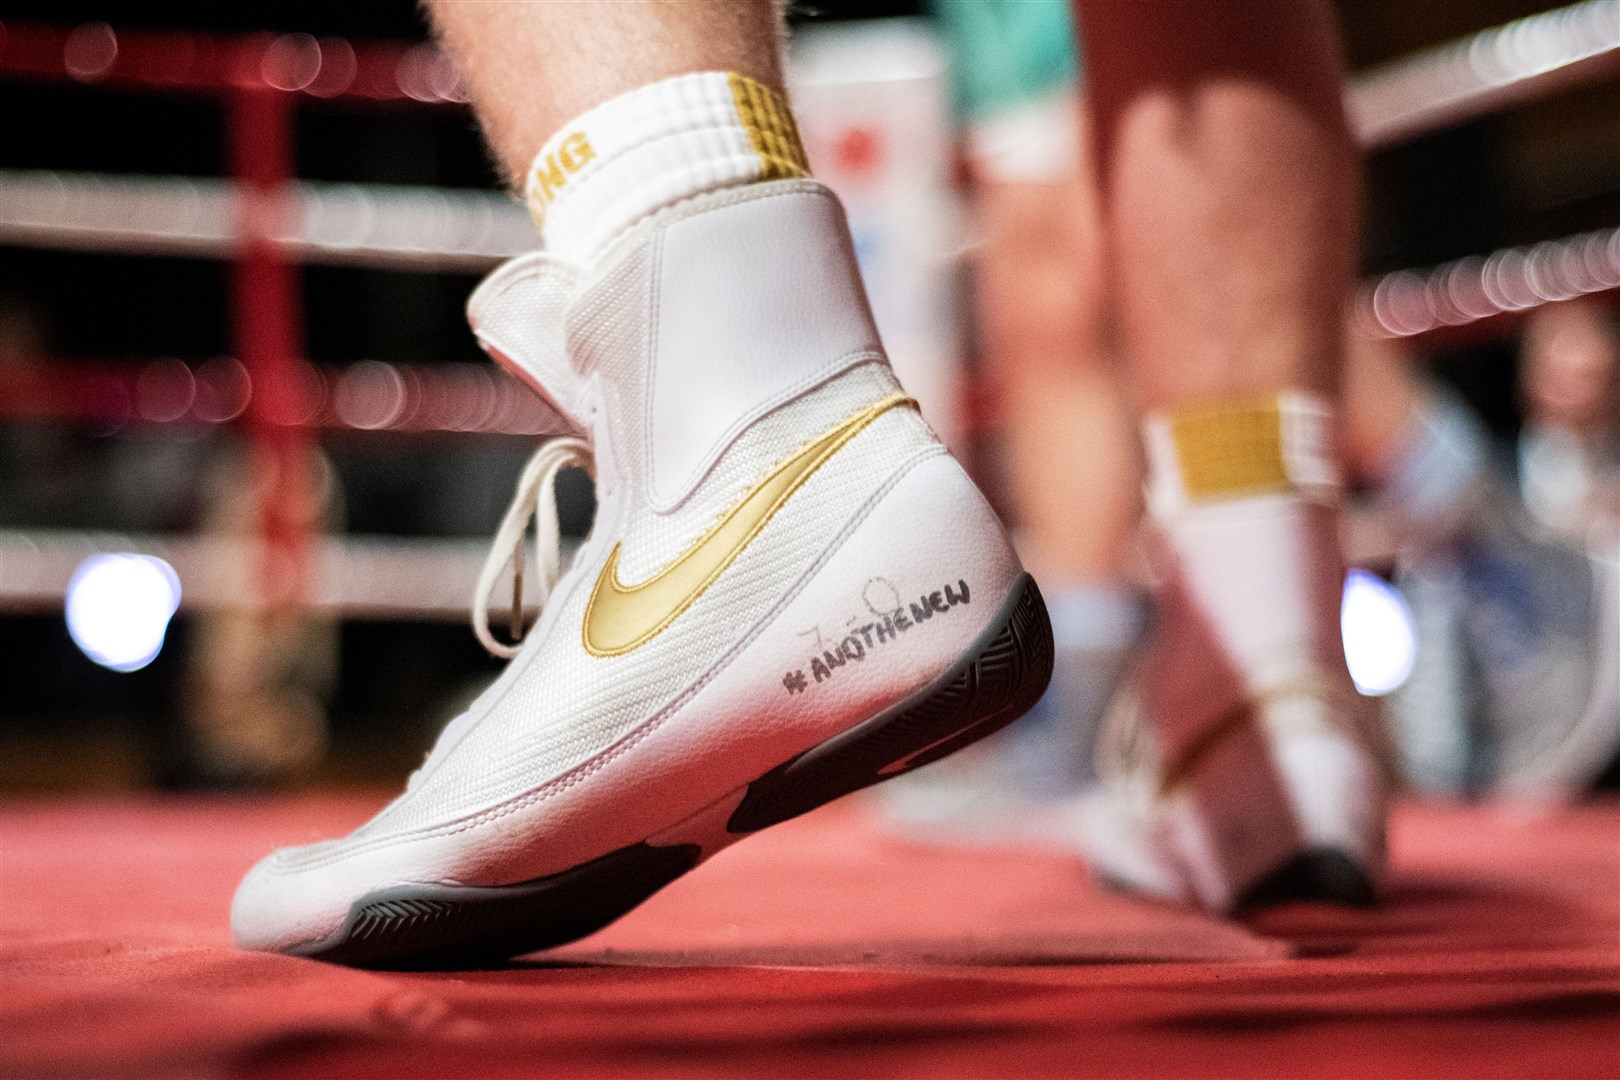 'And the new.......Scottish super-welterweight title champ's prediction on his boxing shoe proved to be correct. Picture: Daniel Forsyth..